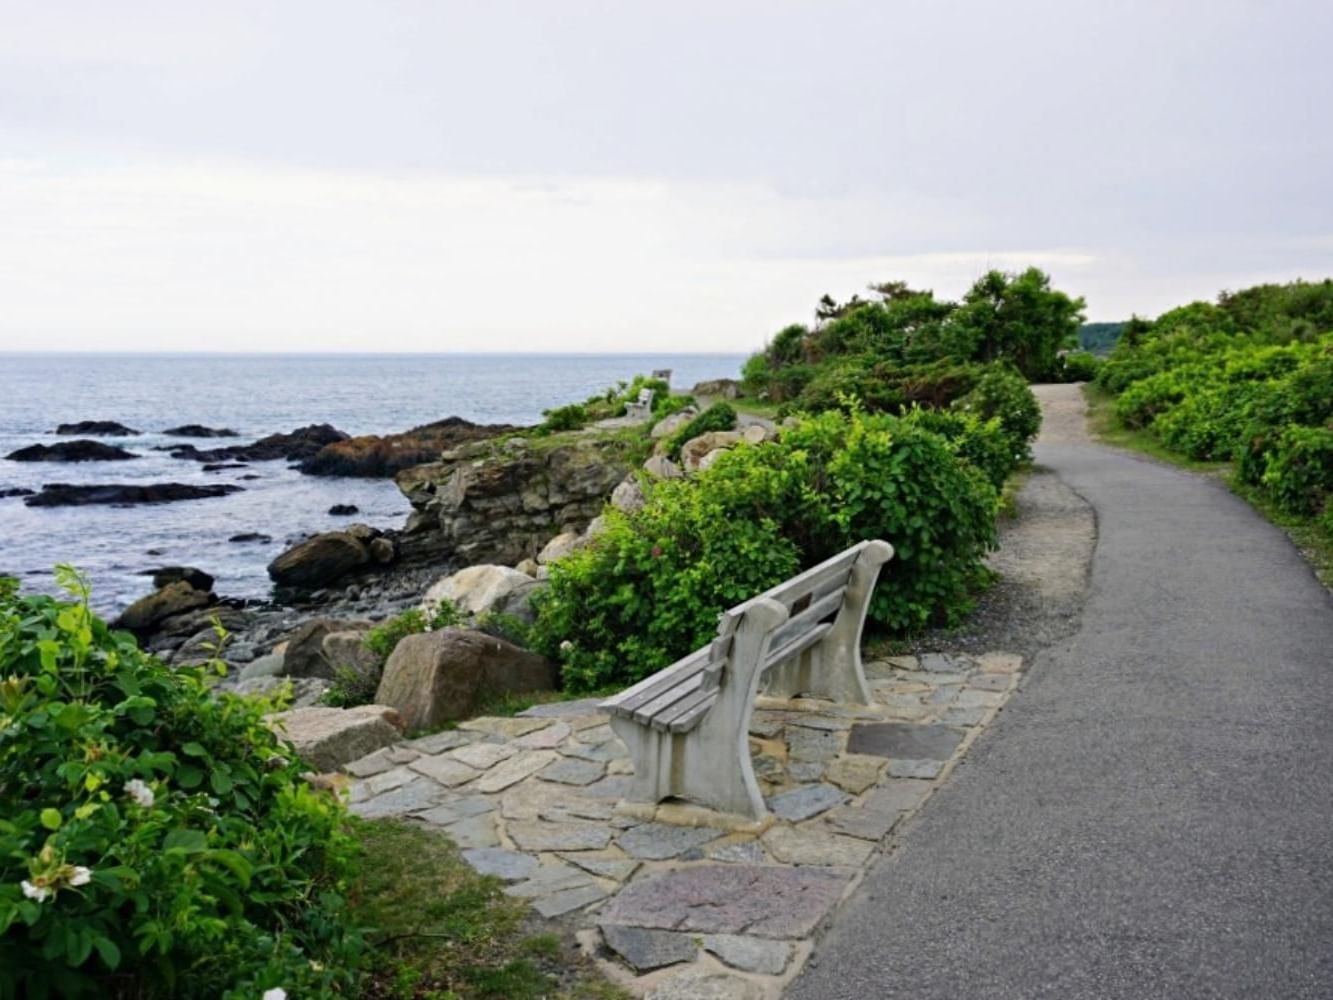 A bench on a coastal path, overlooking the ocean in Marginal Way near Anchorage by the Sea